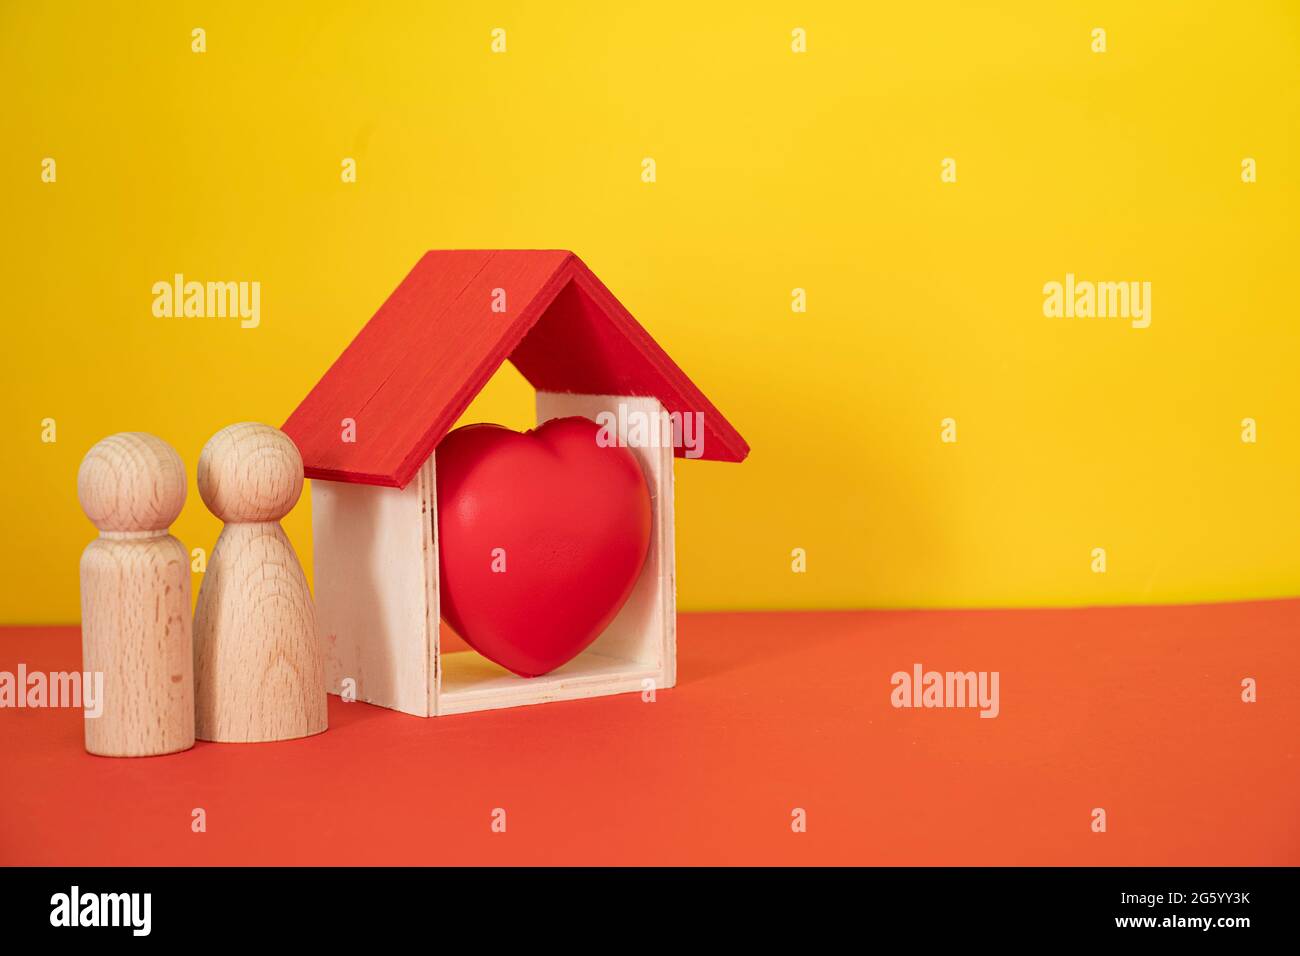 Layout depicting the proverb Home is where the heart is. Selective focus points. Blurred background Stock Photo